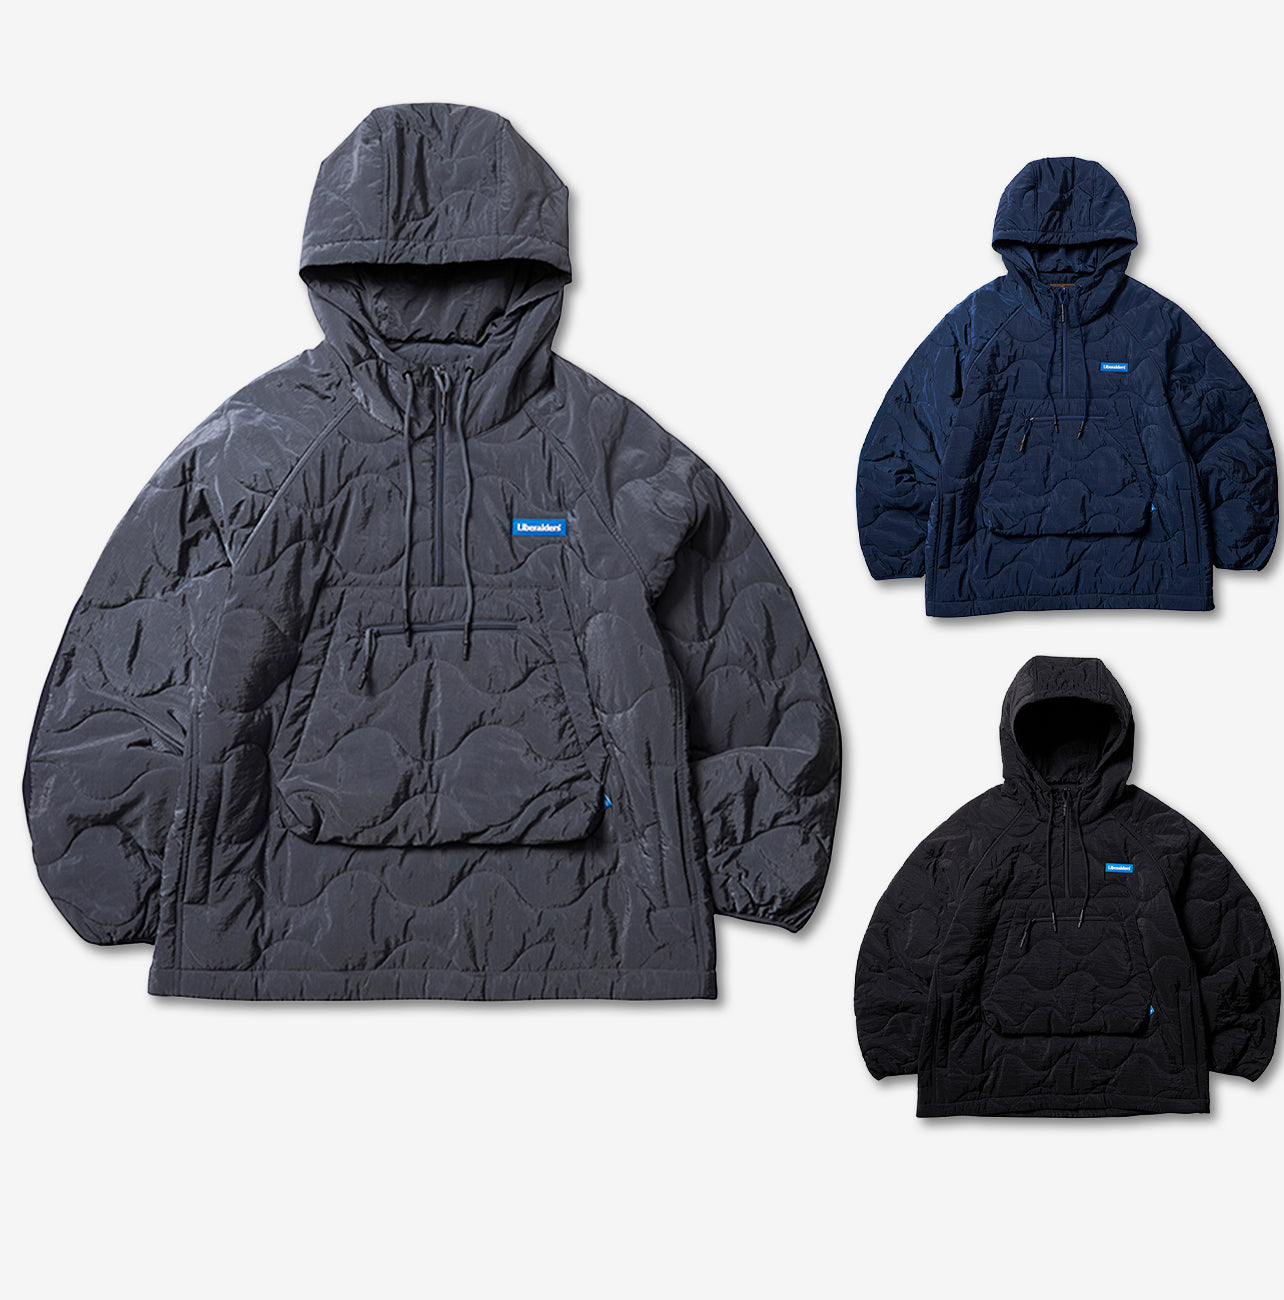 Liberaiders 23 / QUILTED RIPSTOP NYLON HOODIE 75301